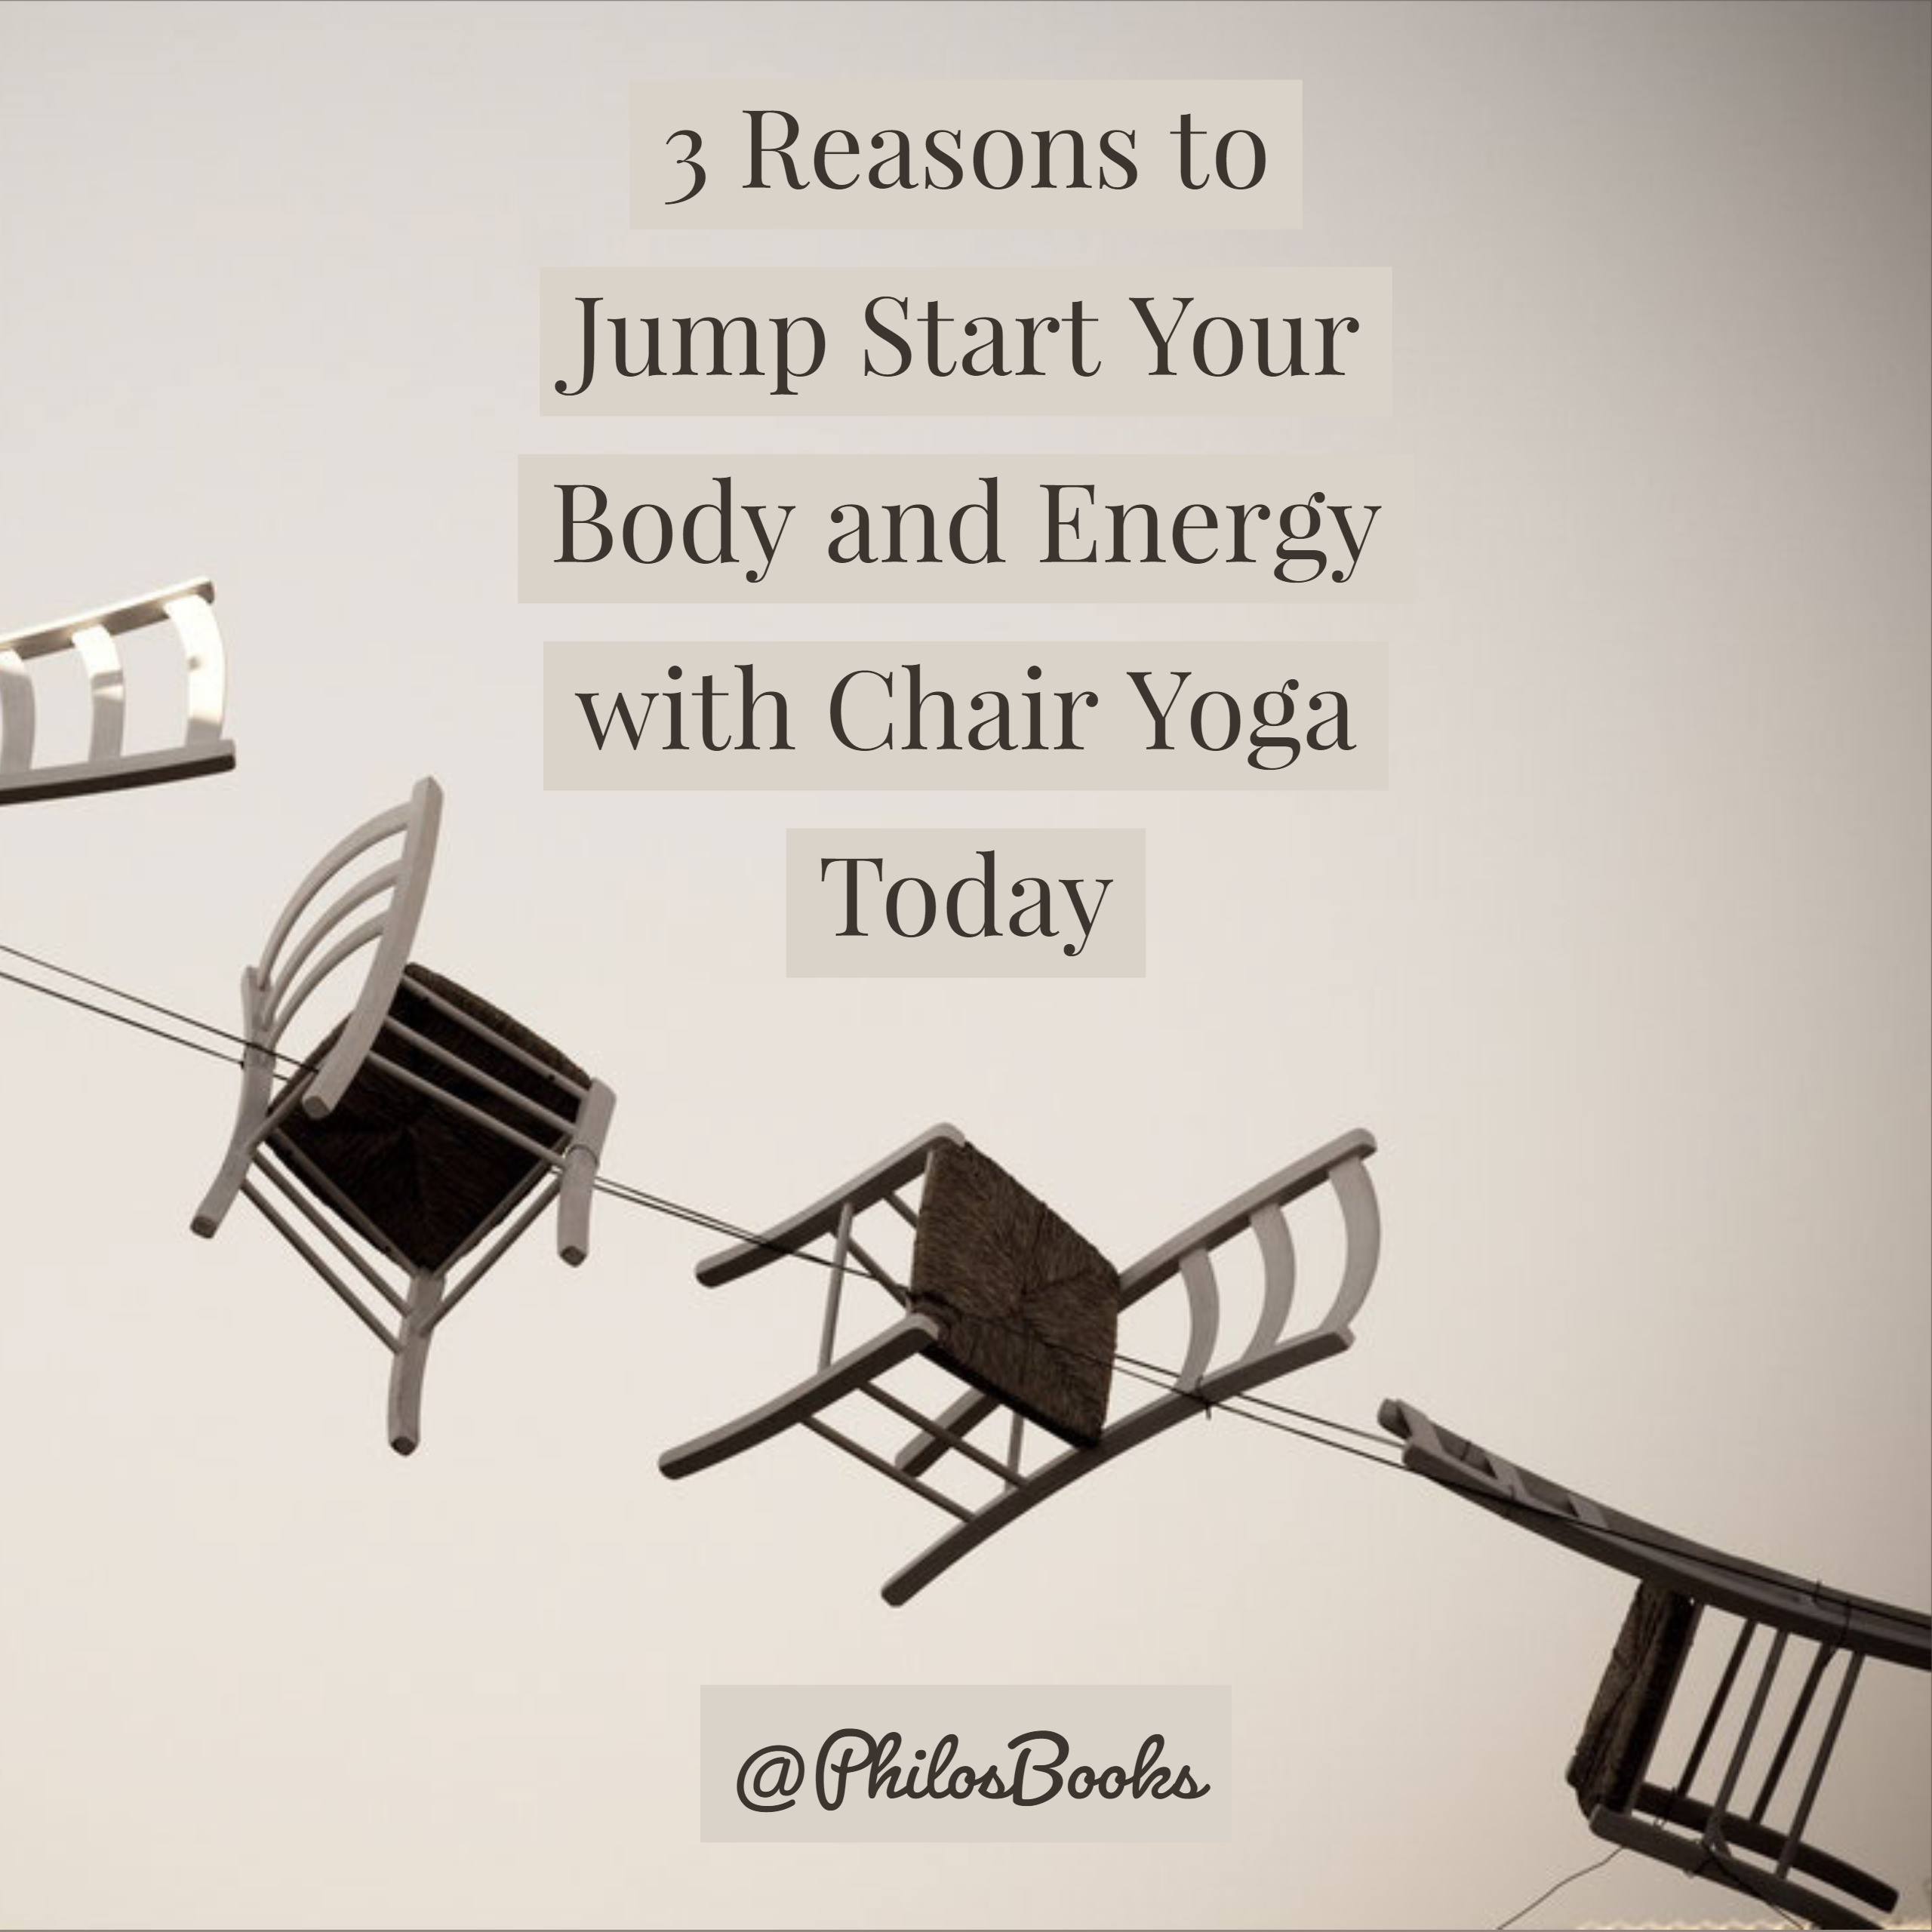 3 Reasons to Jumpstart Your Body and Energy with Chair Yoga Today